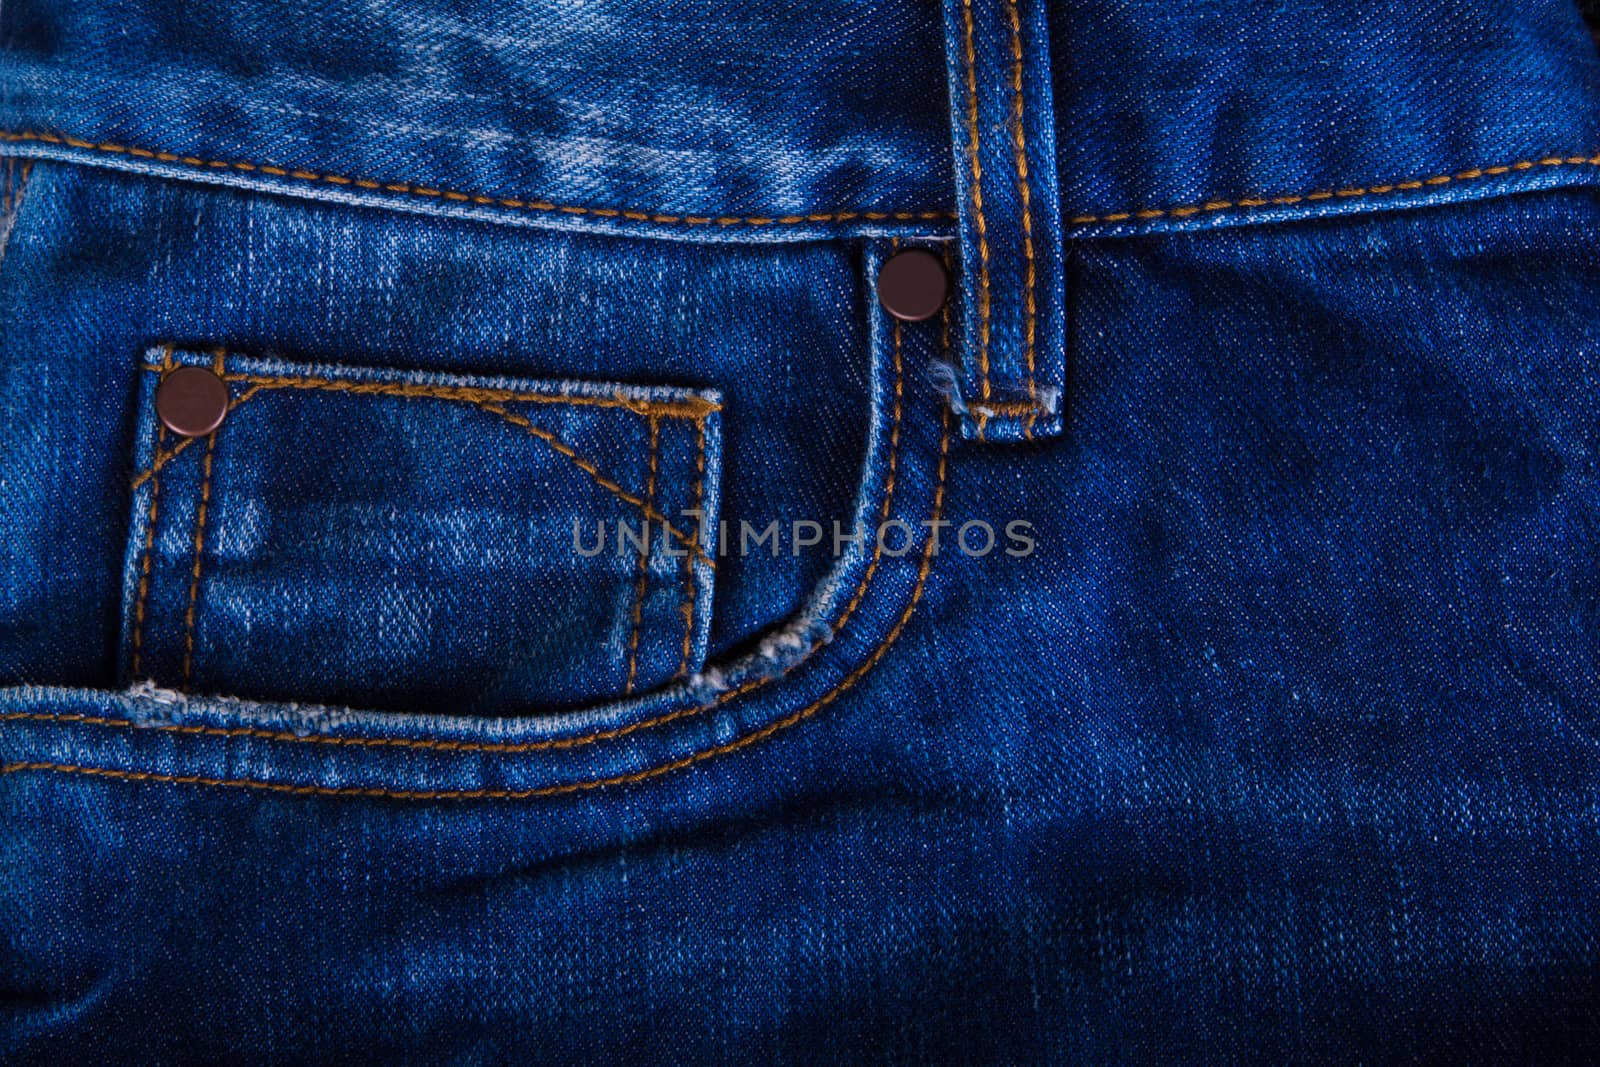 Jeans pocket in close up by grigorenko